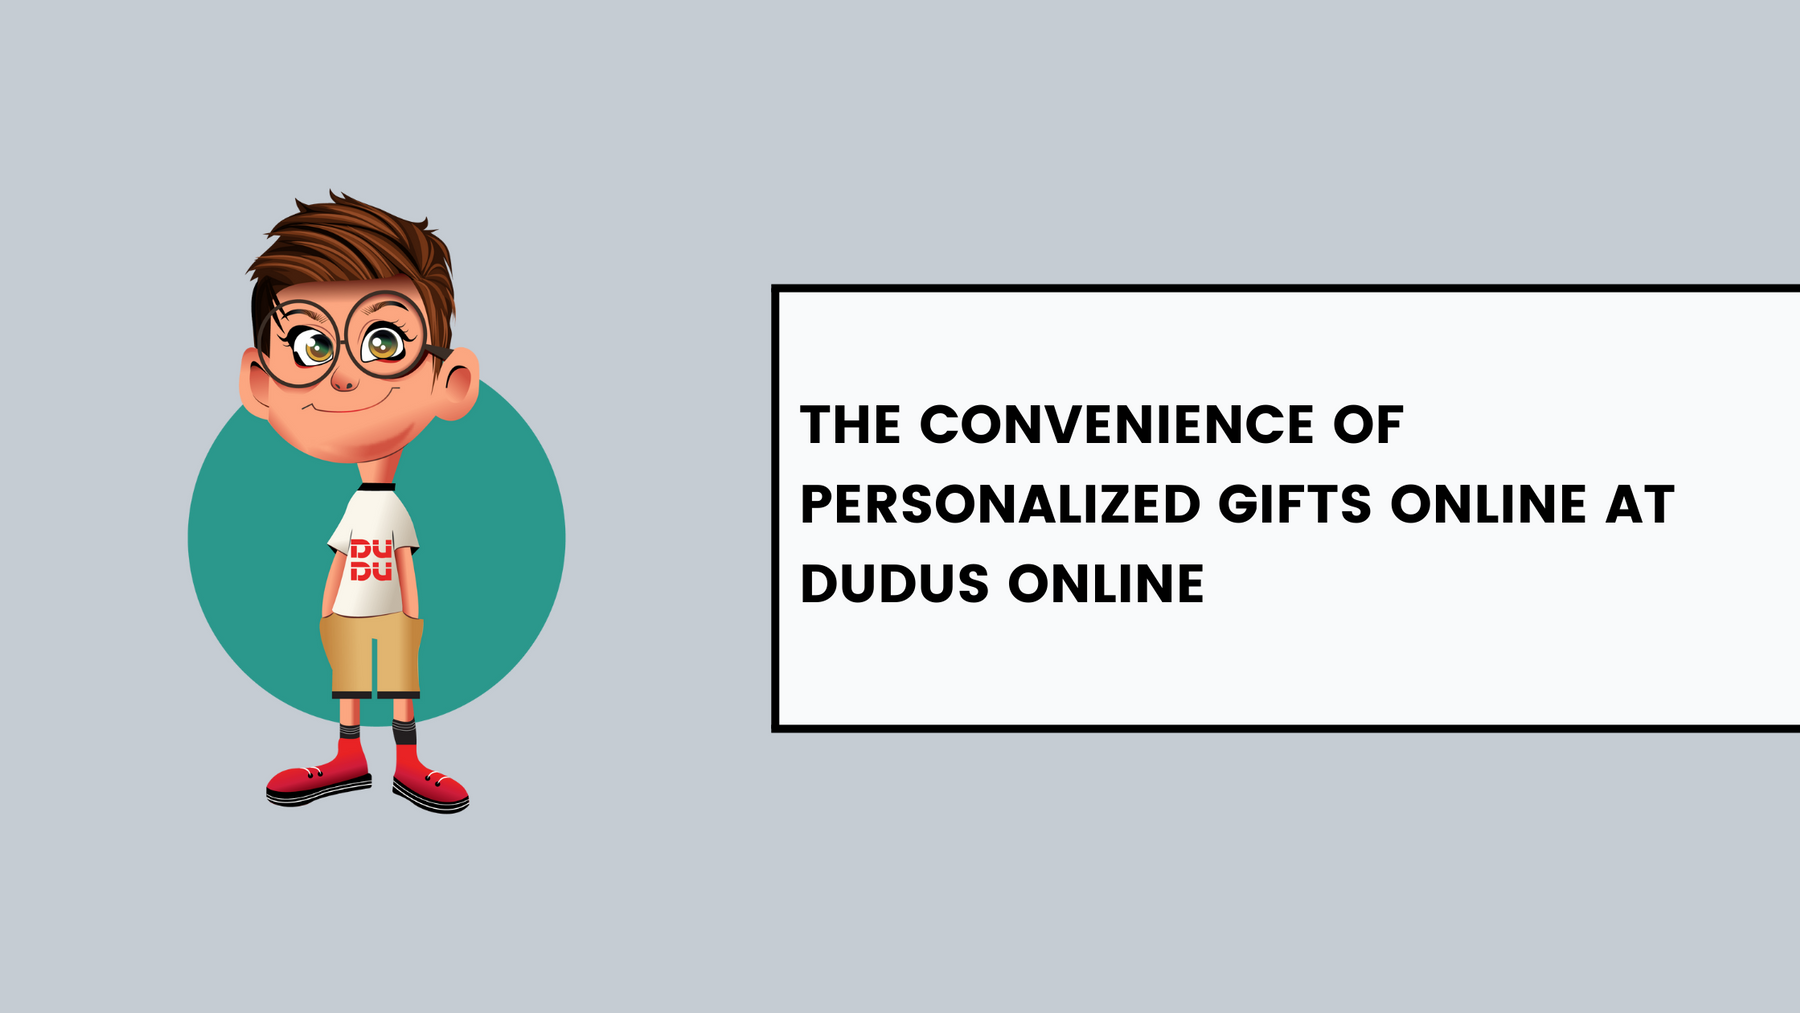 The Convenience of Personalized Gifts Online at Dudus Online